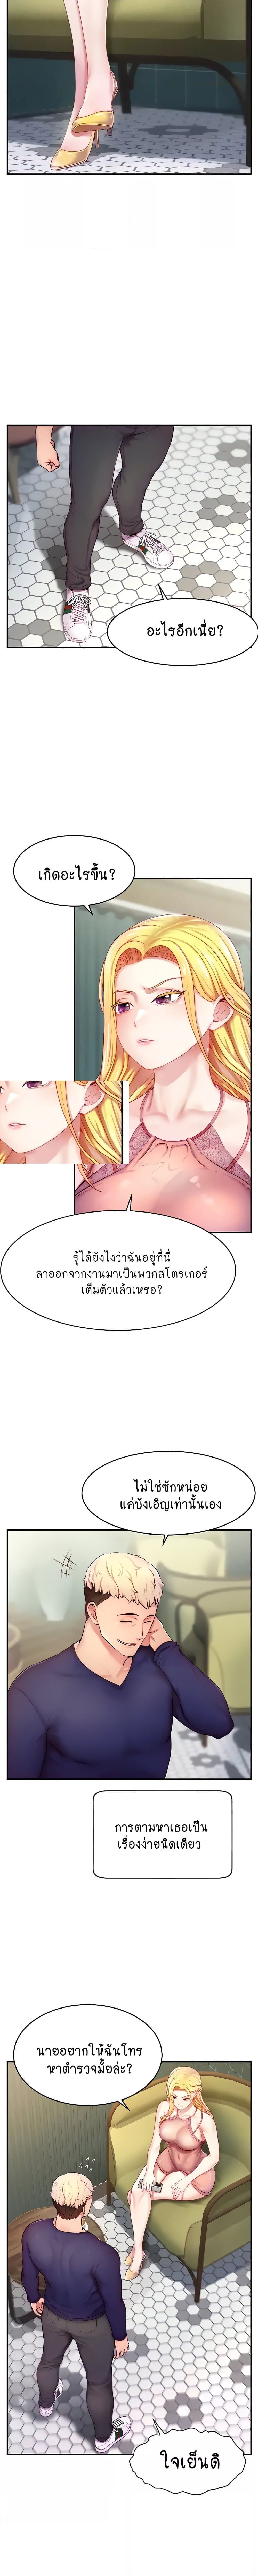 Making Friends With Streamers by Hacking! ตอนที่ 4 ภาพ 2